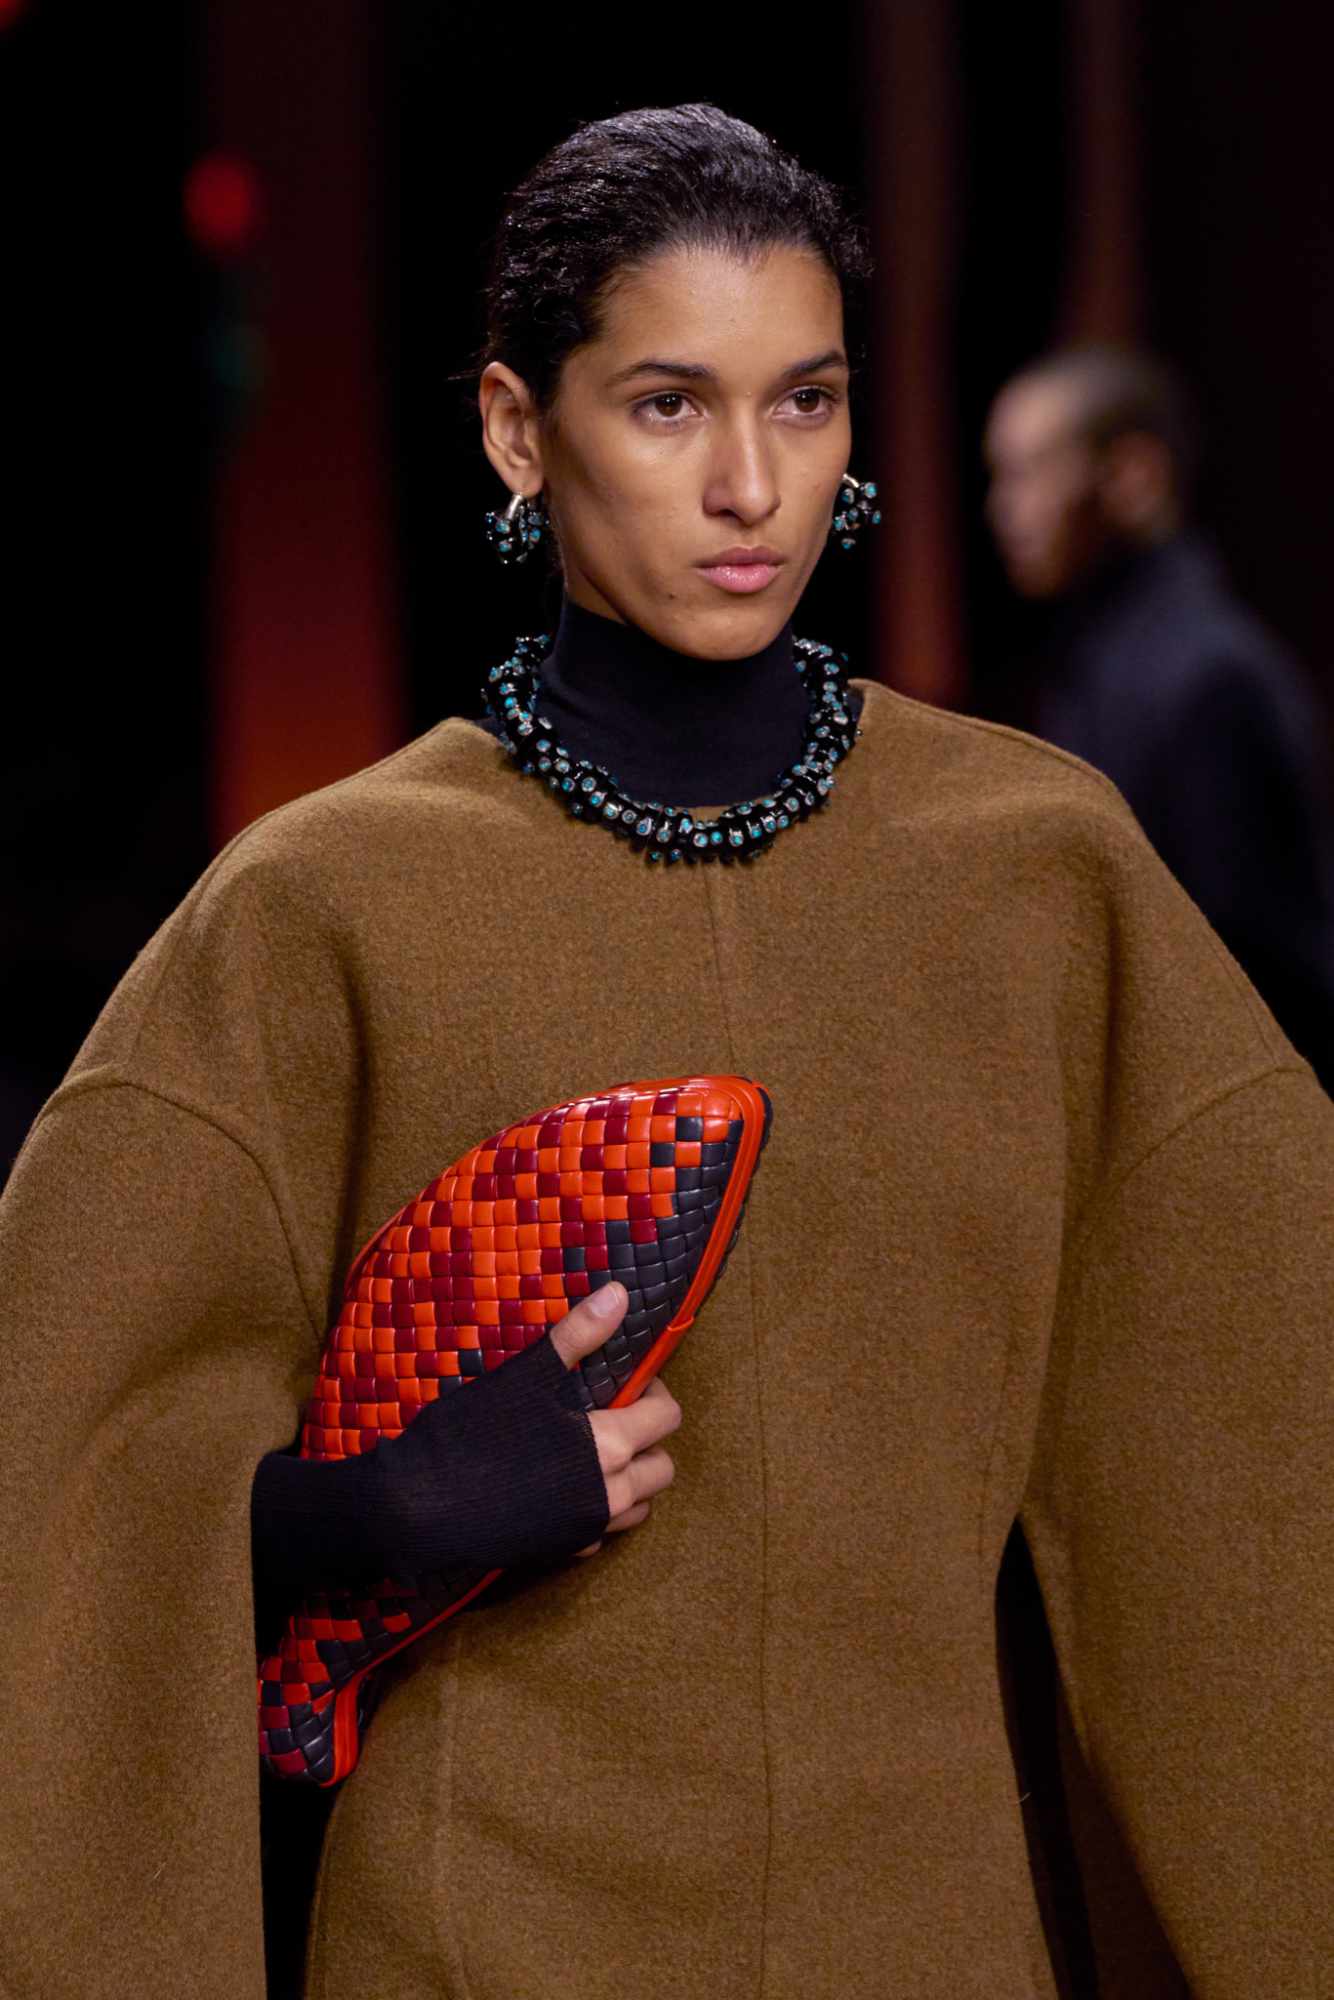 A model at Bottega Veneta's runway show holds a red and black leather fish bag